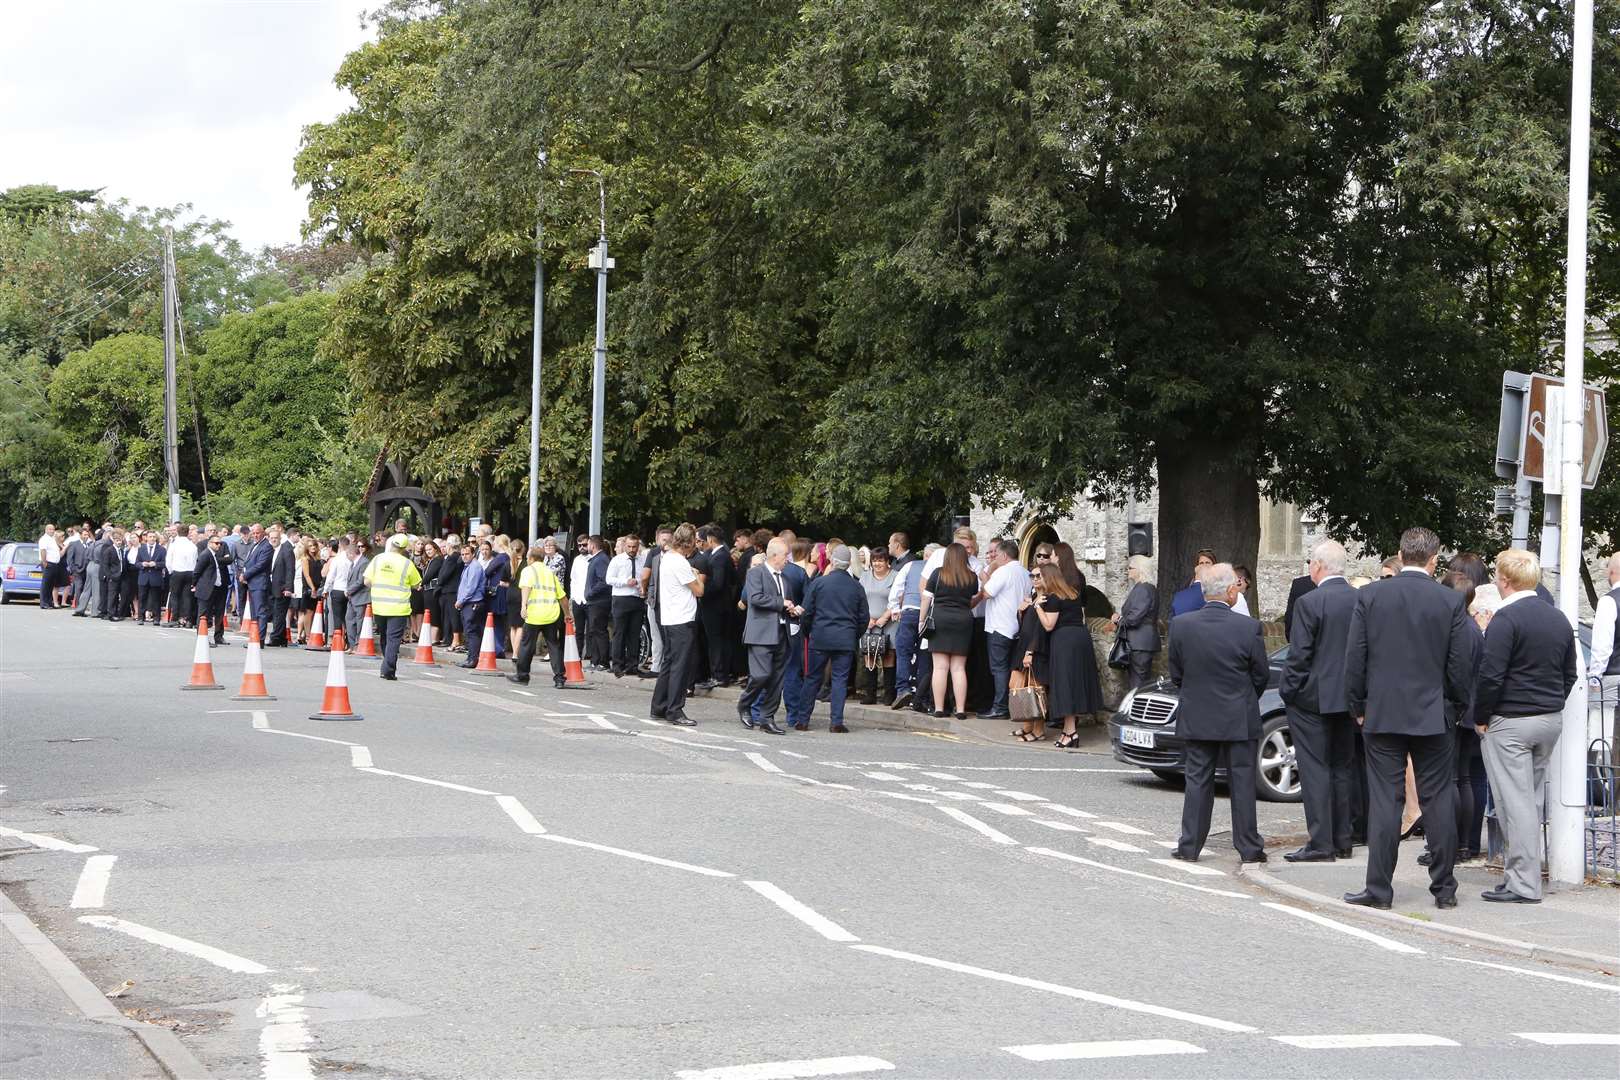 Hundreds turned out for Shane's funeral in August last year